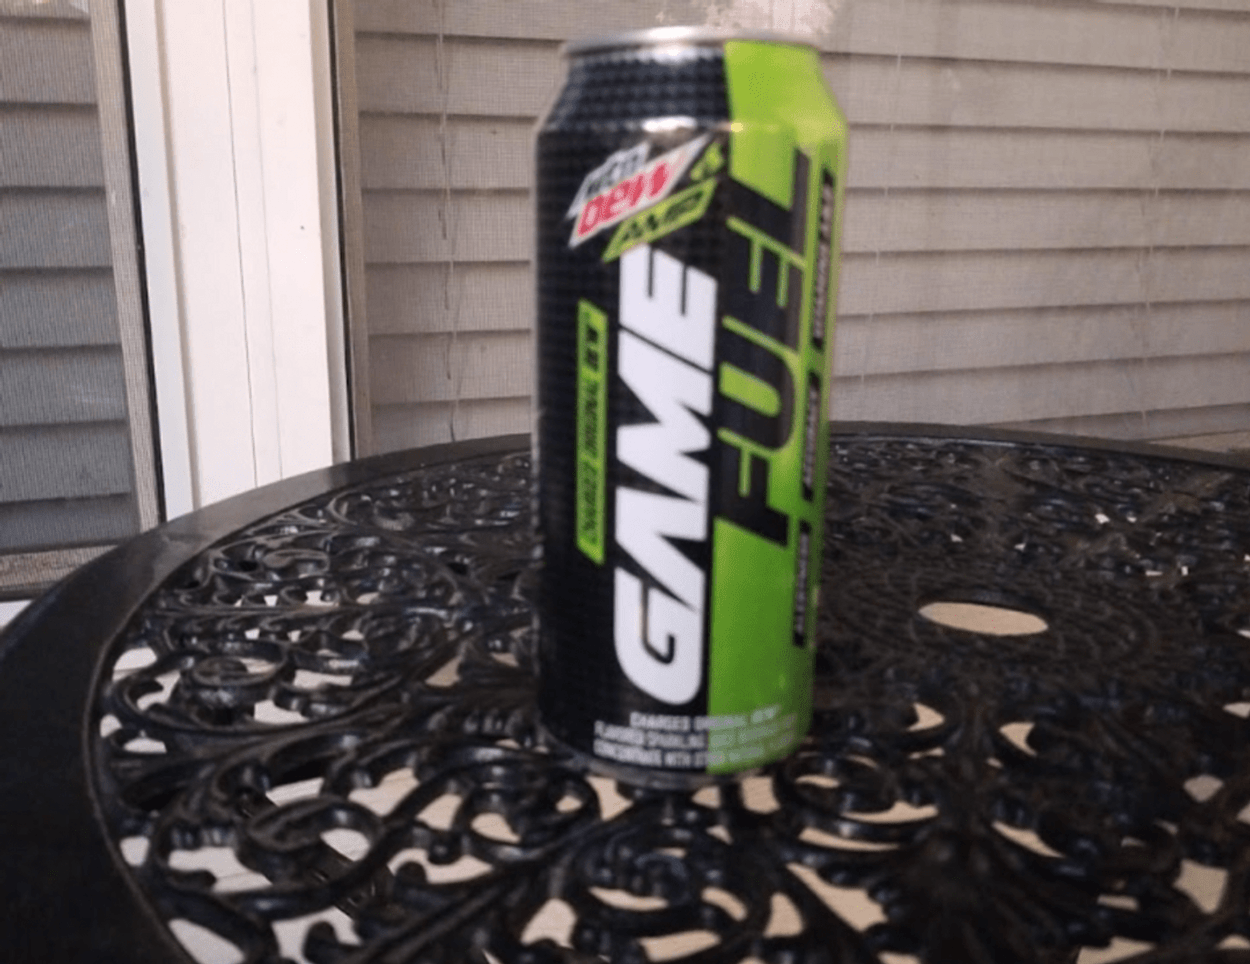 Game Fuel Vs. Kickstart (Which One To Choose?)